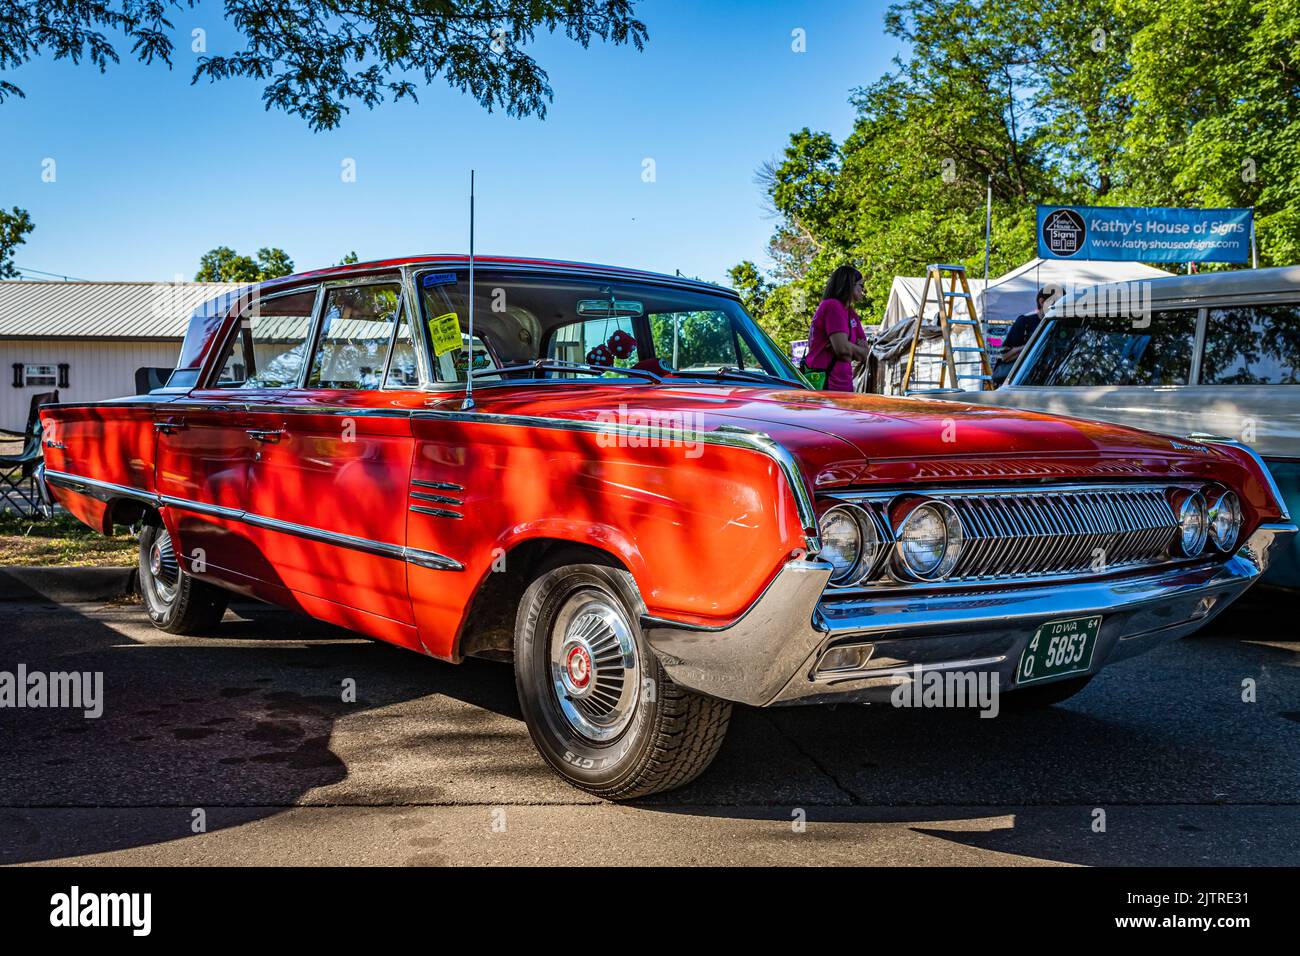 Falcon Heights, MN - June 17, 2022: Low perspective front corner view of a 1964 Mercury Montclair Breezeway Sedan at a local car show. Stock Photo